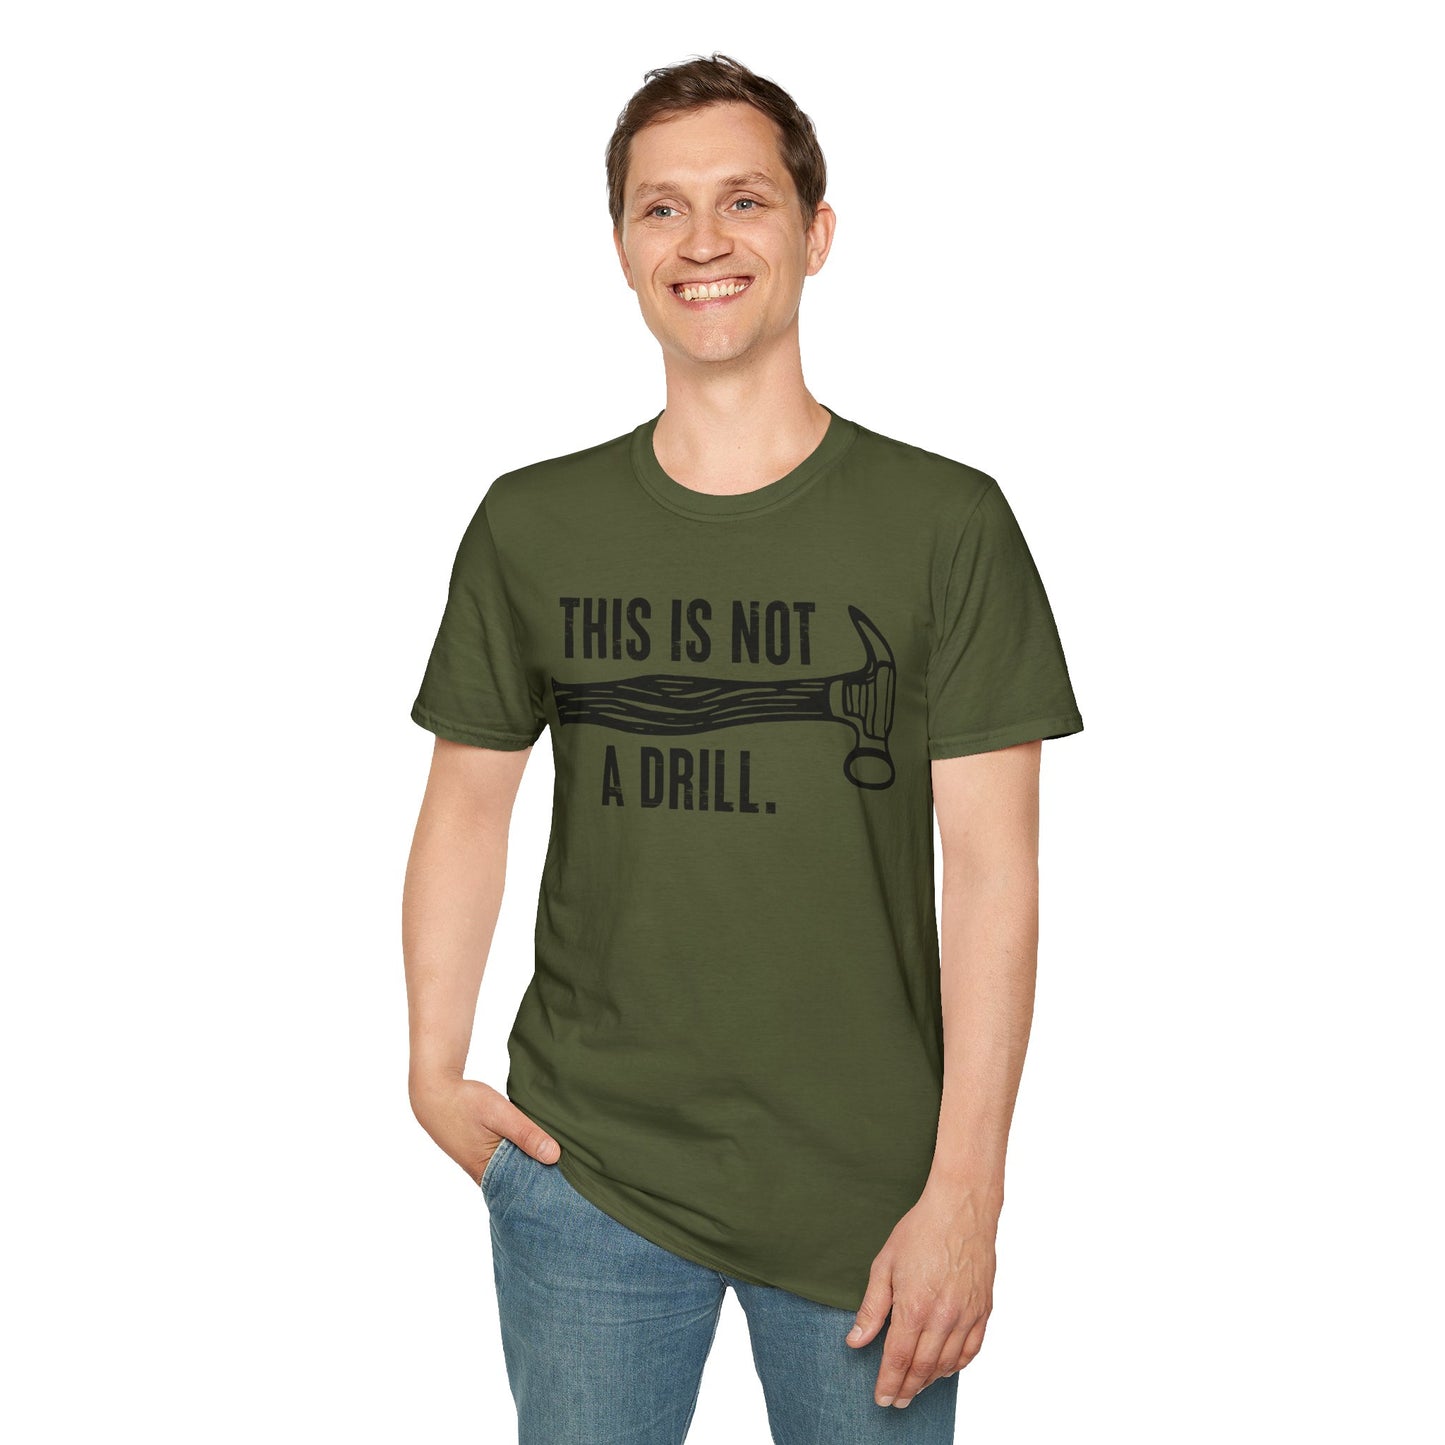 "This Is Not A Drill' Unisex Softstyle T-Shirt